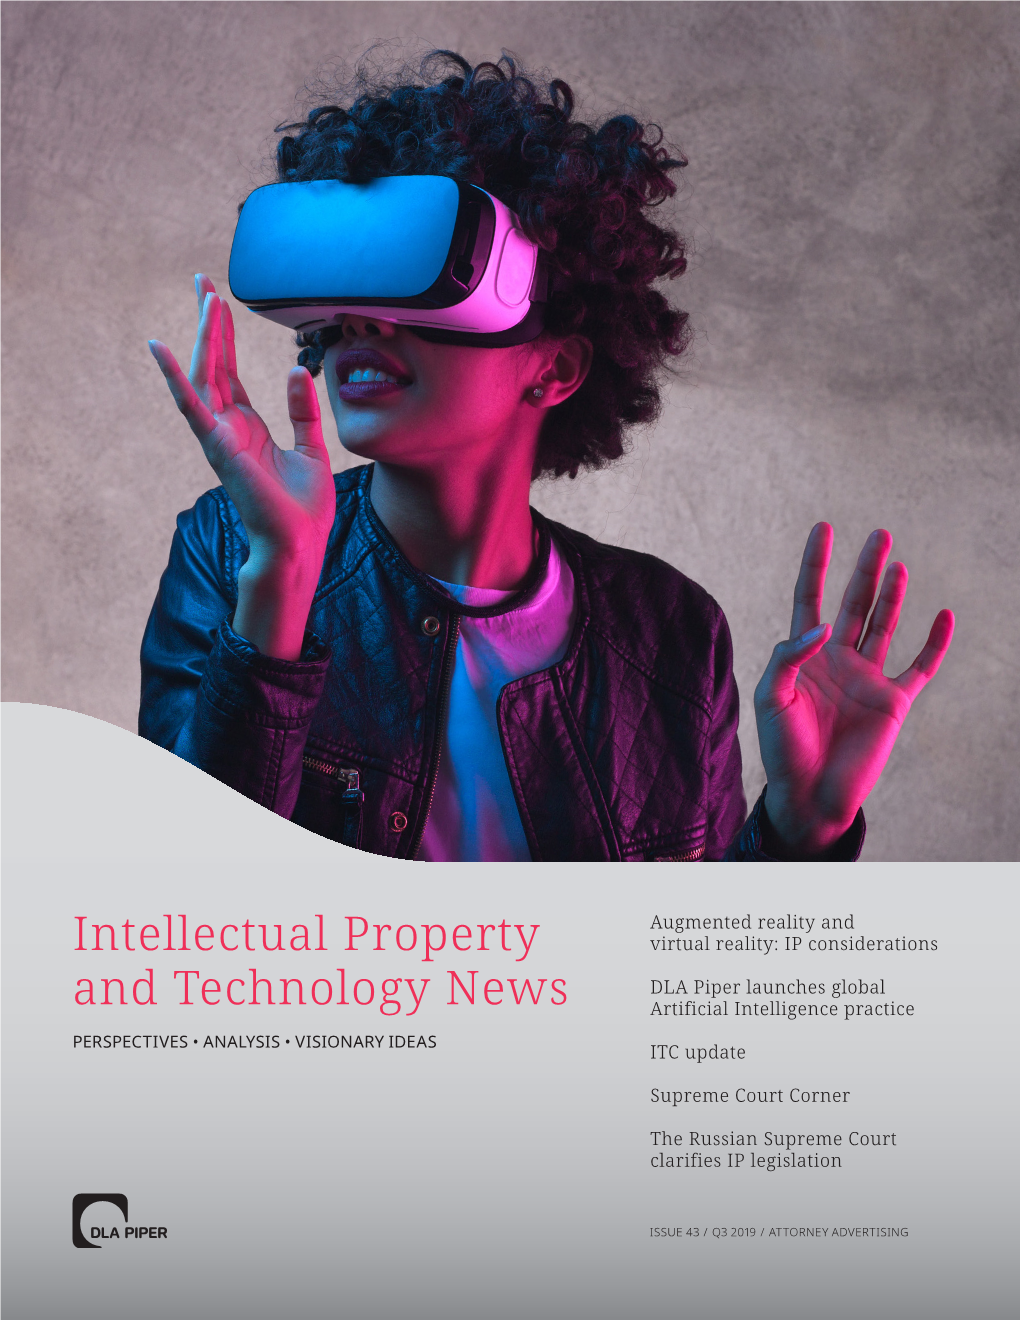 Intellectual Property and Technology News Is Published in the North America, Asia Pacific and EMEA Regions